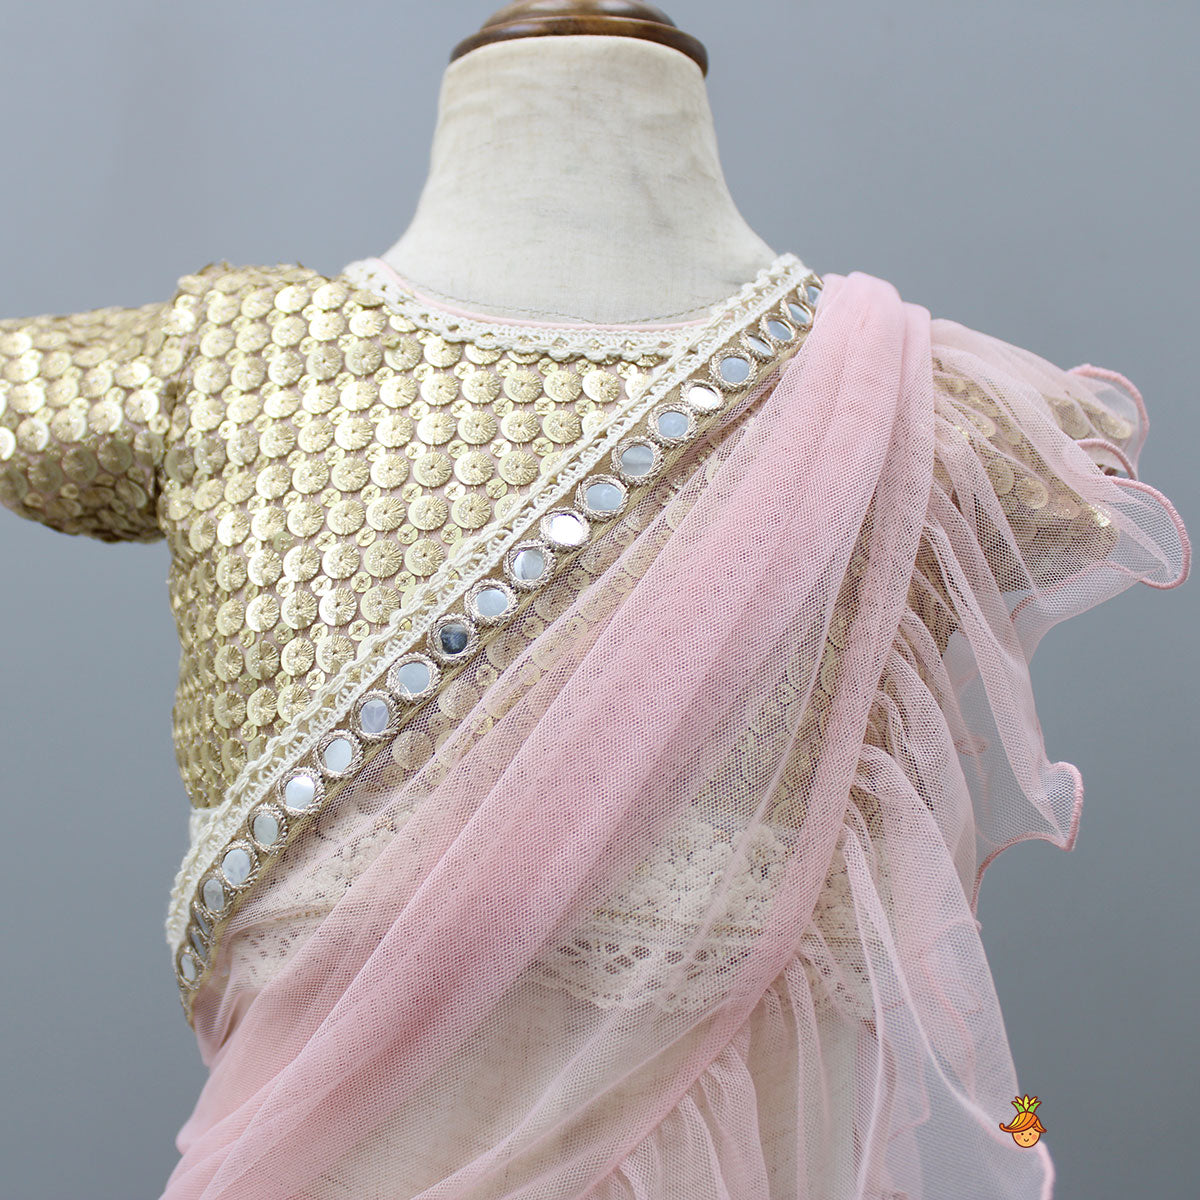 Sequins Work Top With Embroidered Lehenga And Attached Dupatta